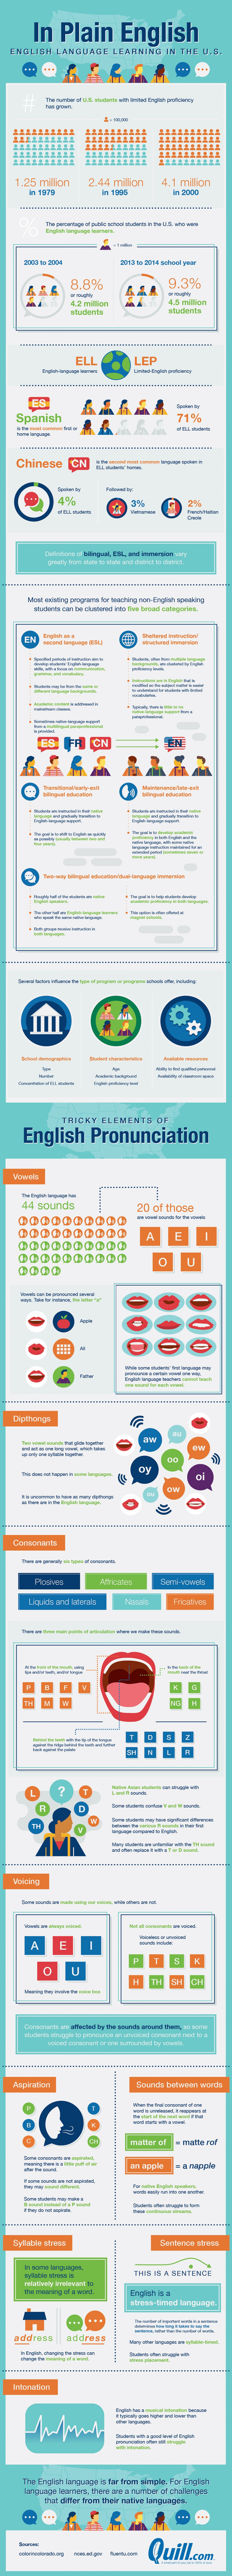 In plain English: English language learning in the U.S. Infographic